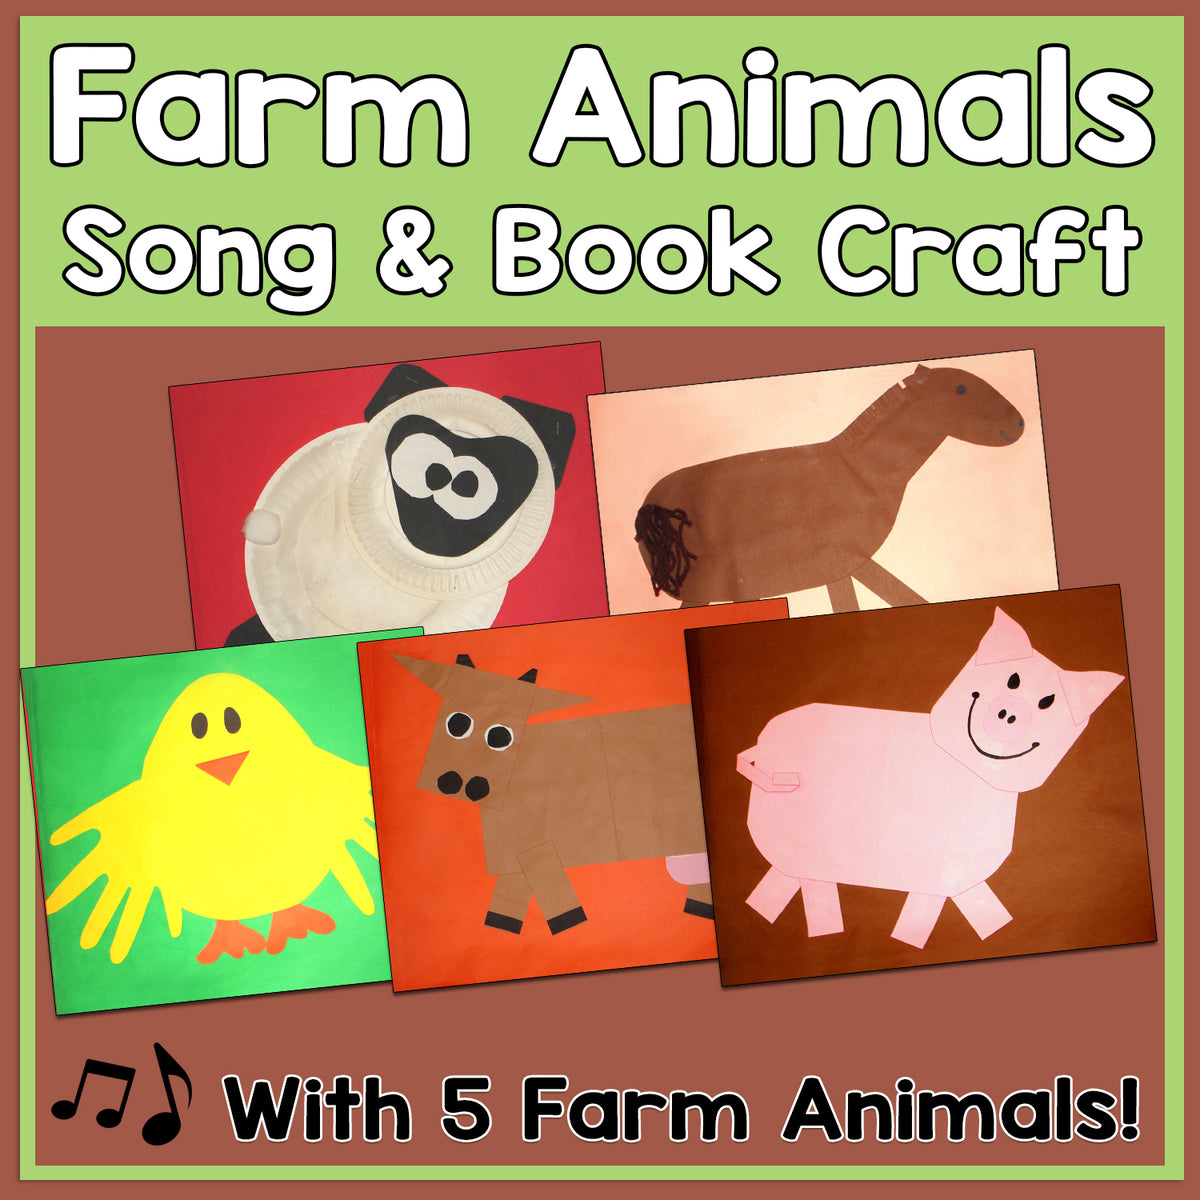 Our School Farm Song &  Book Craft